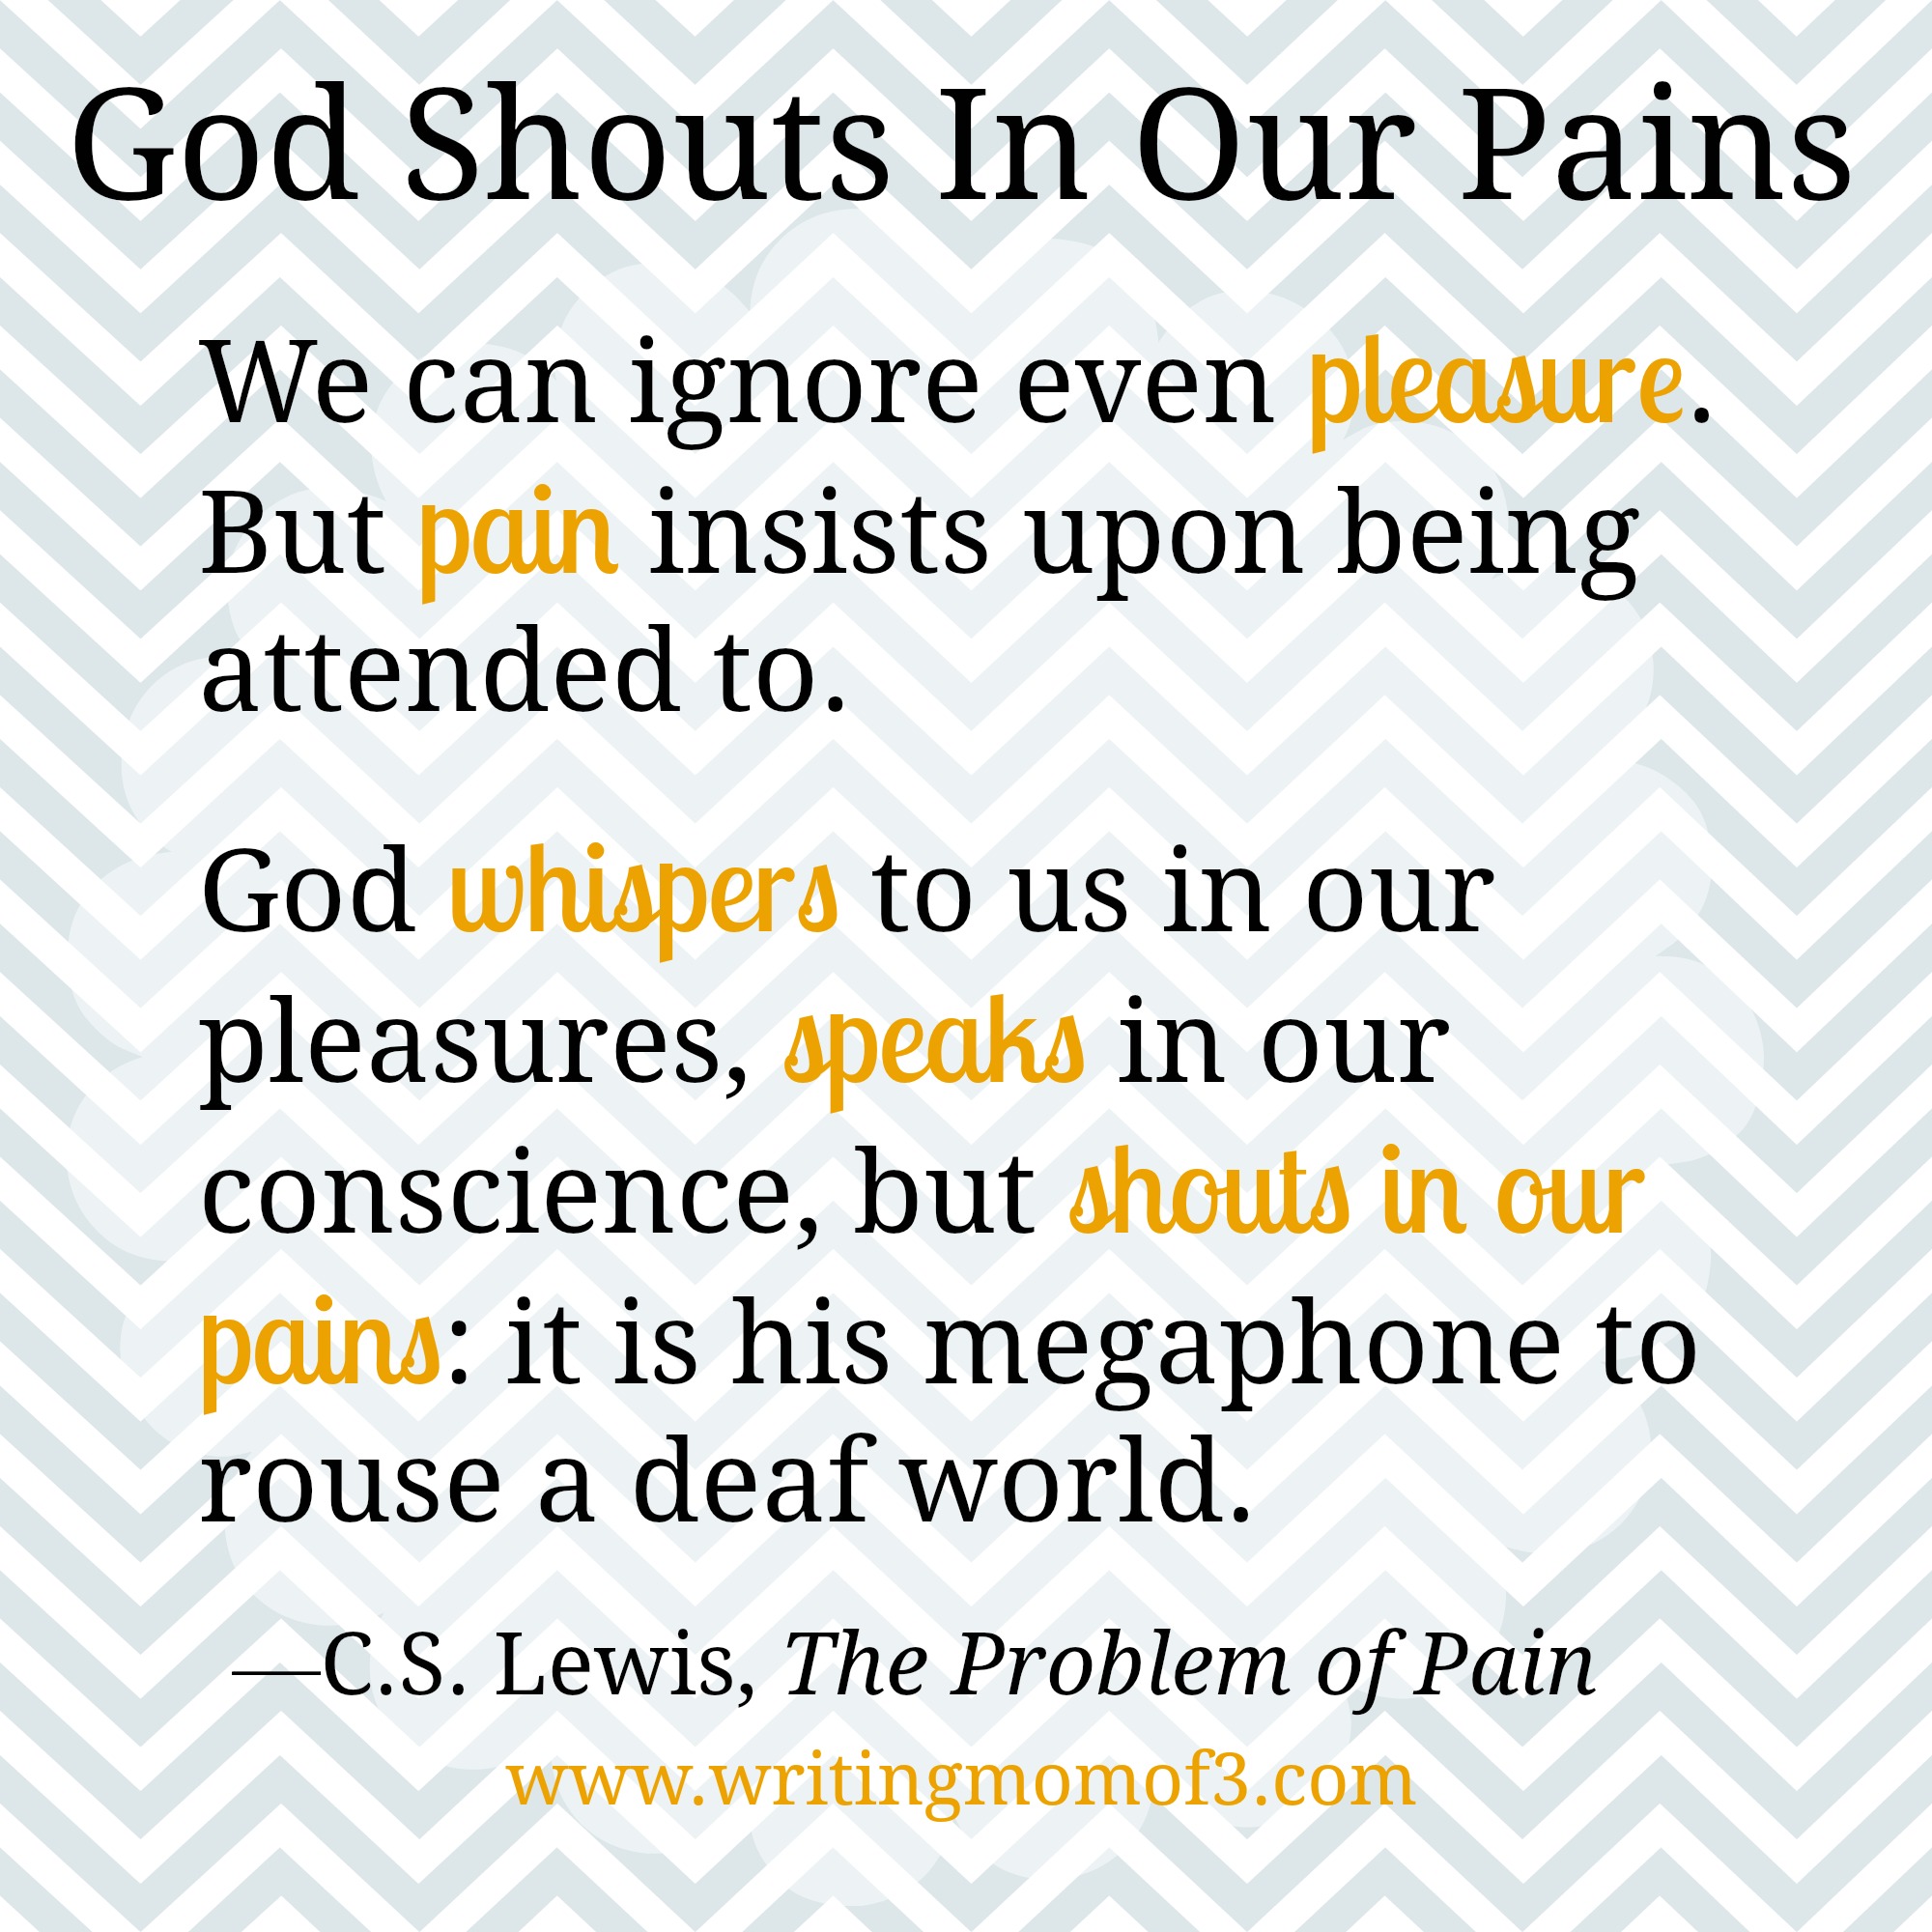 C.S. Lewis quote: God Shouts in Our Pains